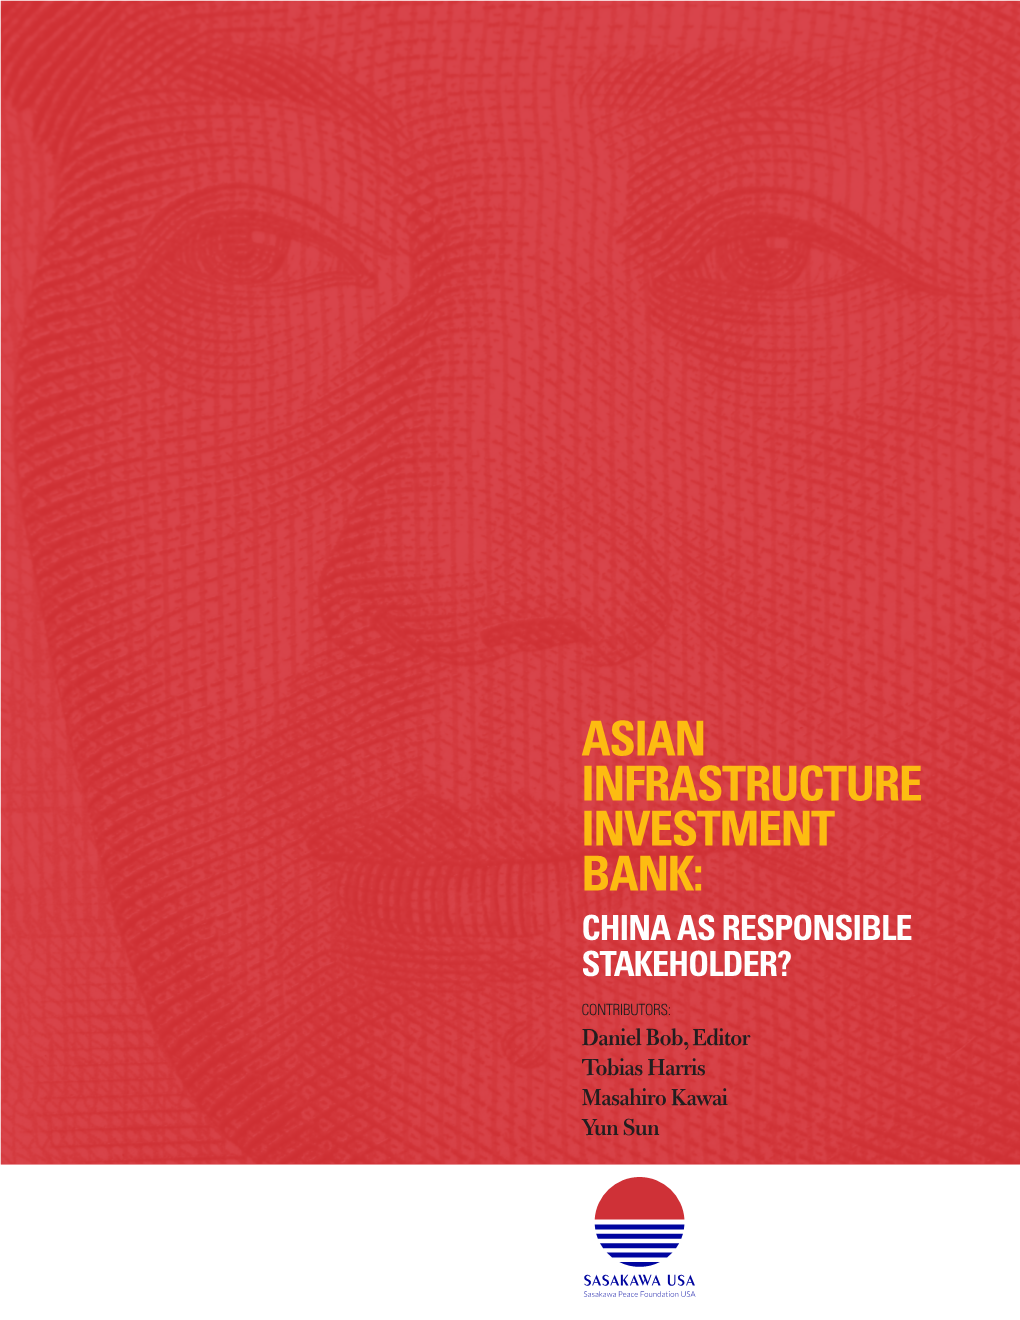 Asian Infrastructure Investment Bank: China As Responsible Stakeholder?